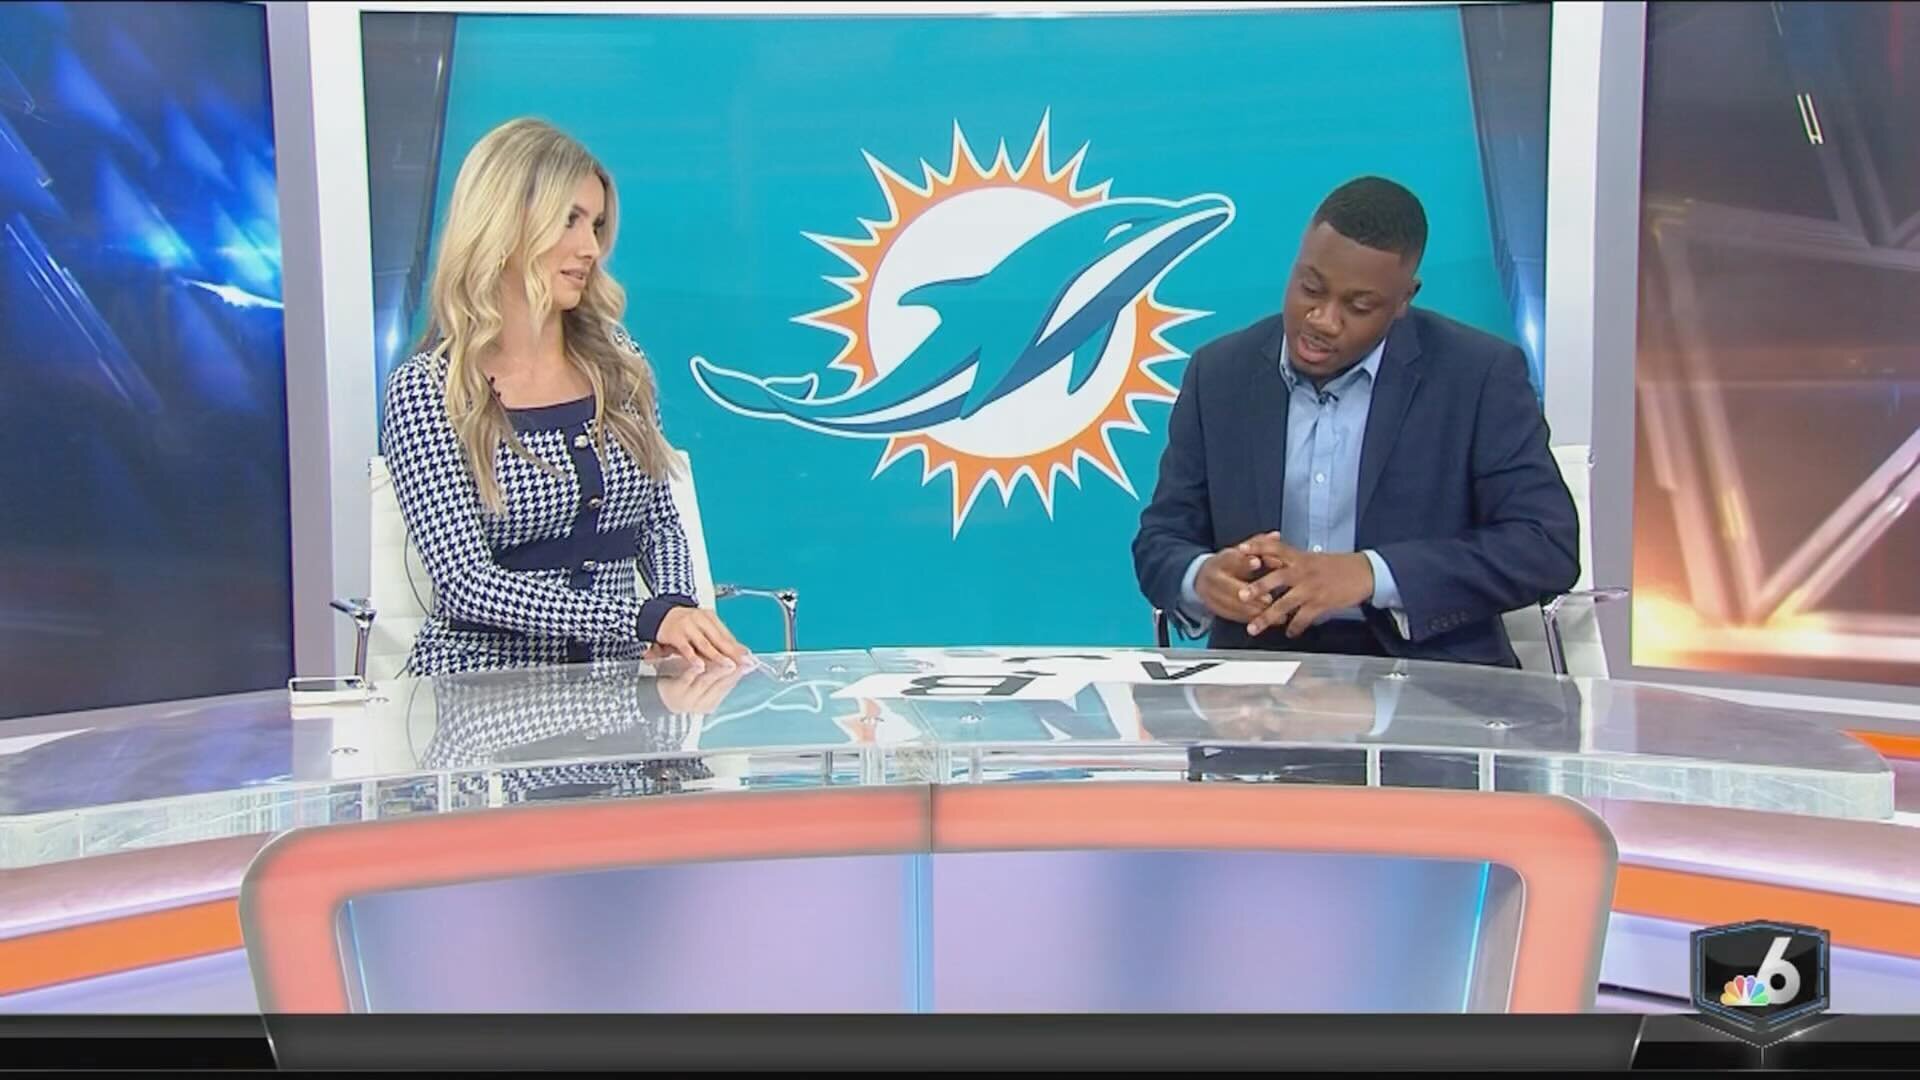 Stretch run of the NFL regular season is approaching. The Dolphins are back at it on Sunday but before that, I joined @nbc6 to hand out midseason grades. High marks for the top team in the AFC East👌🏾